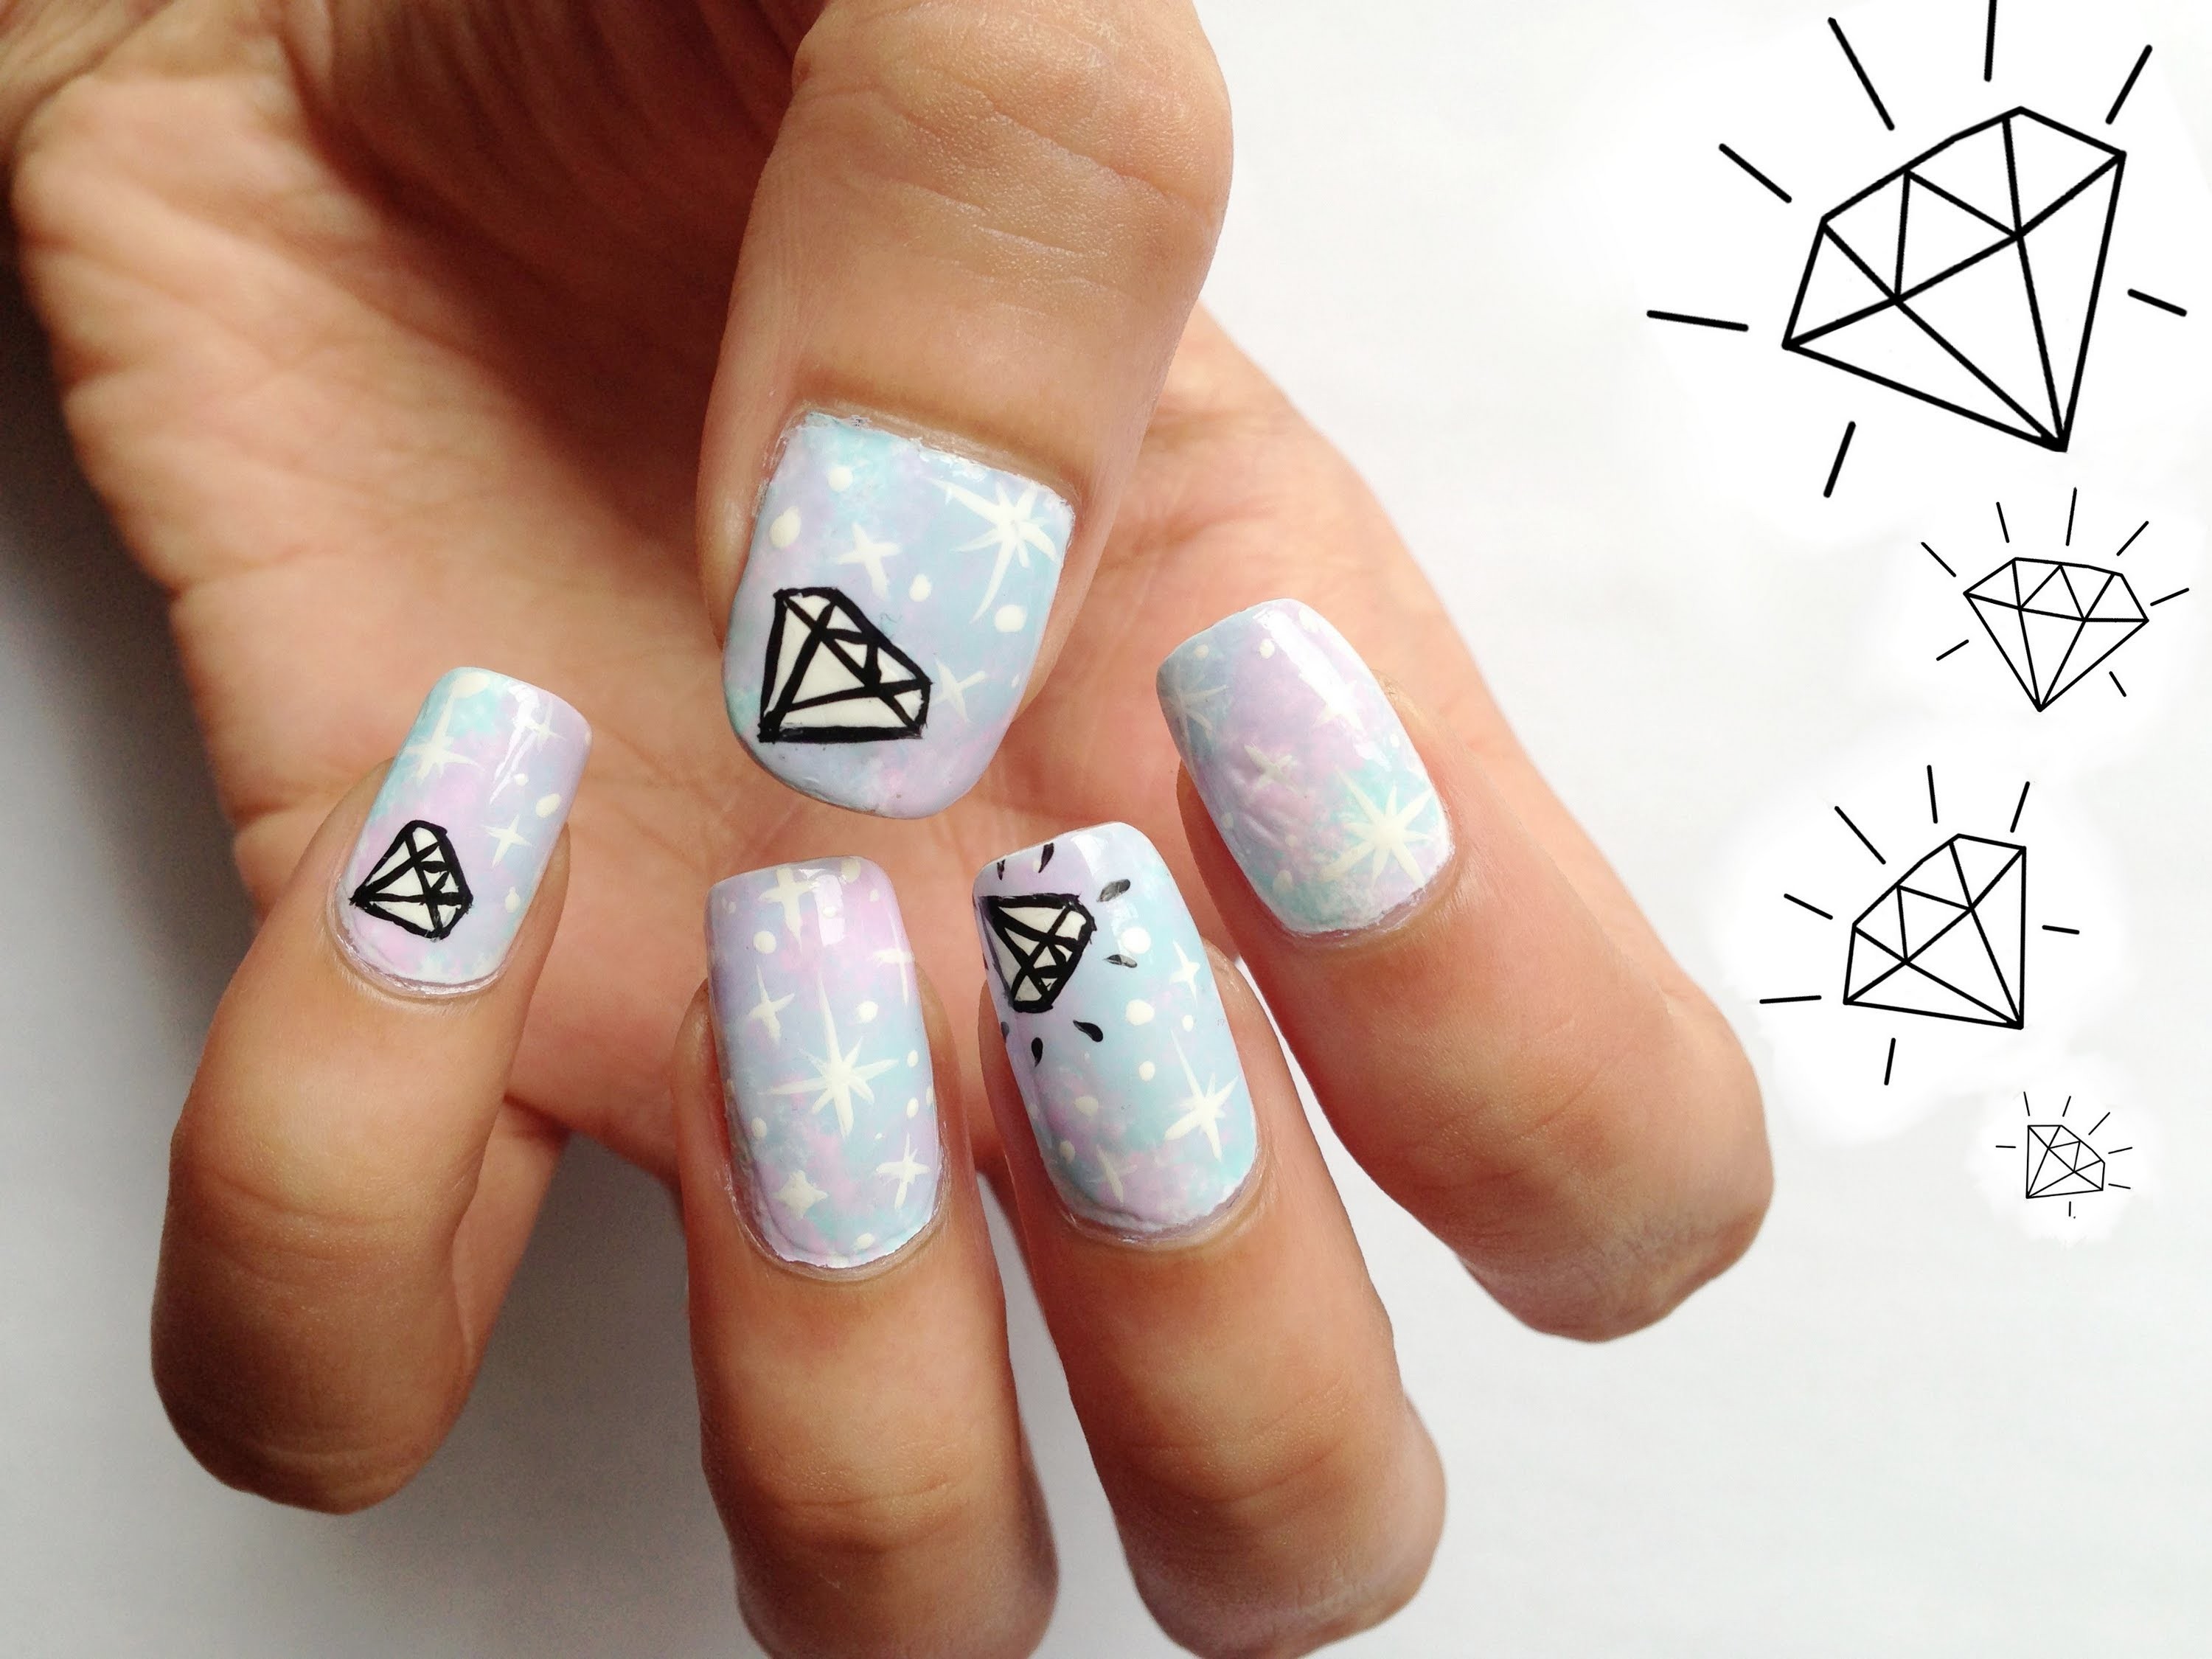 4. "Tumblr-Worthy Almond Nail Designs for Every Occasion" - wide 7